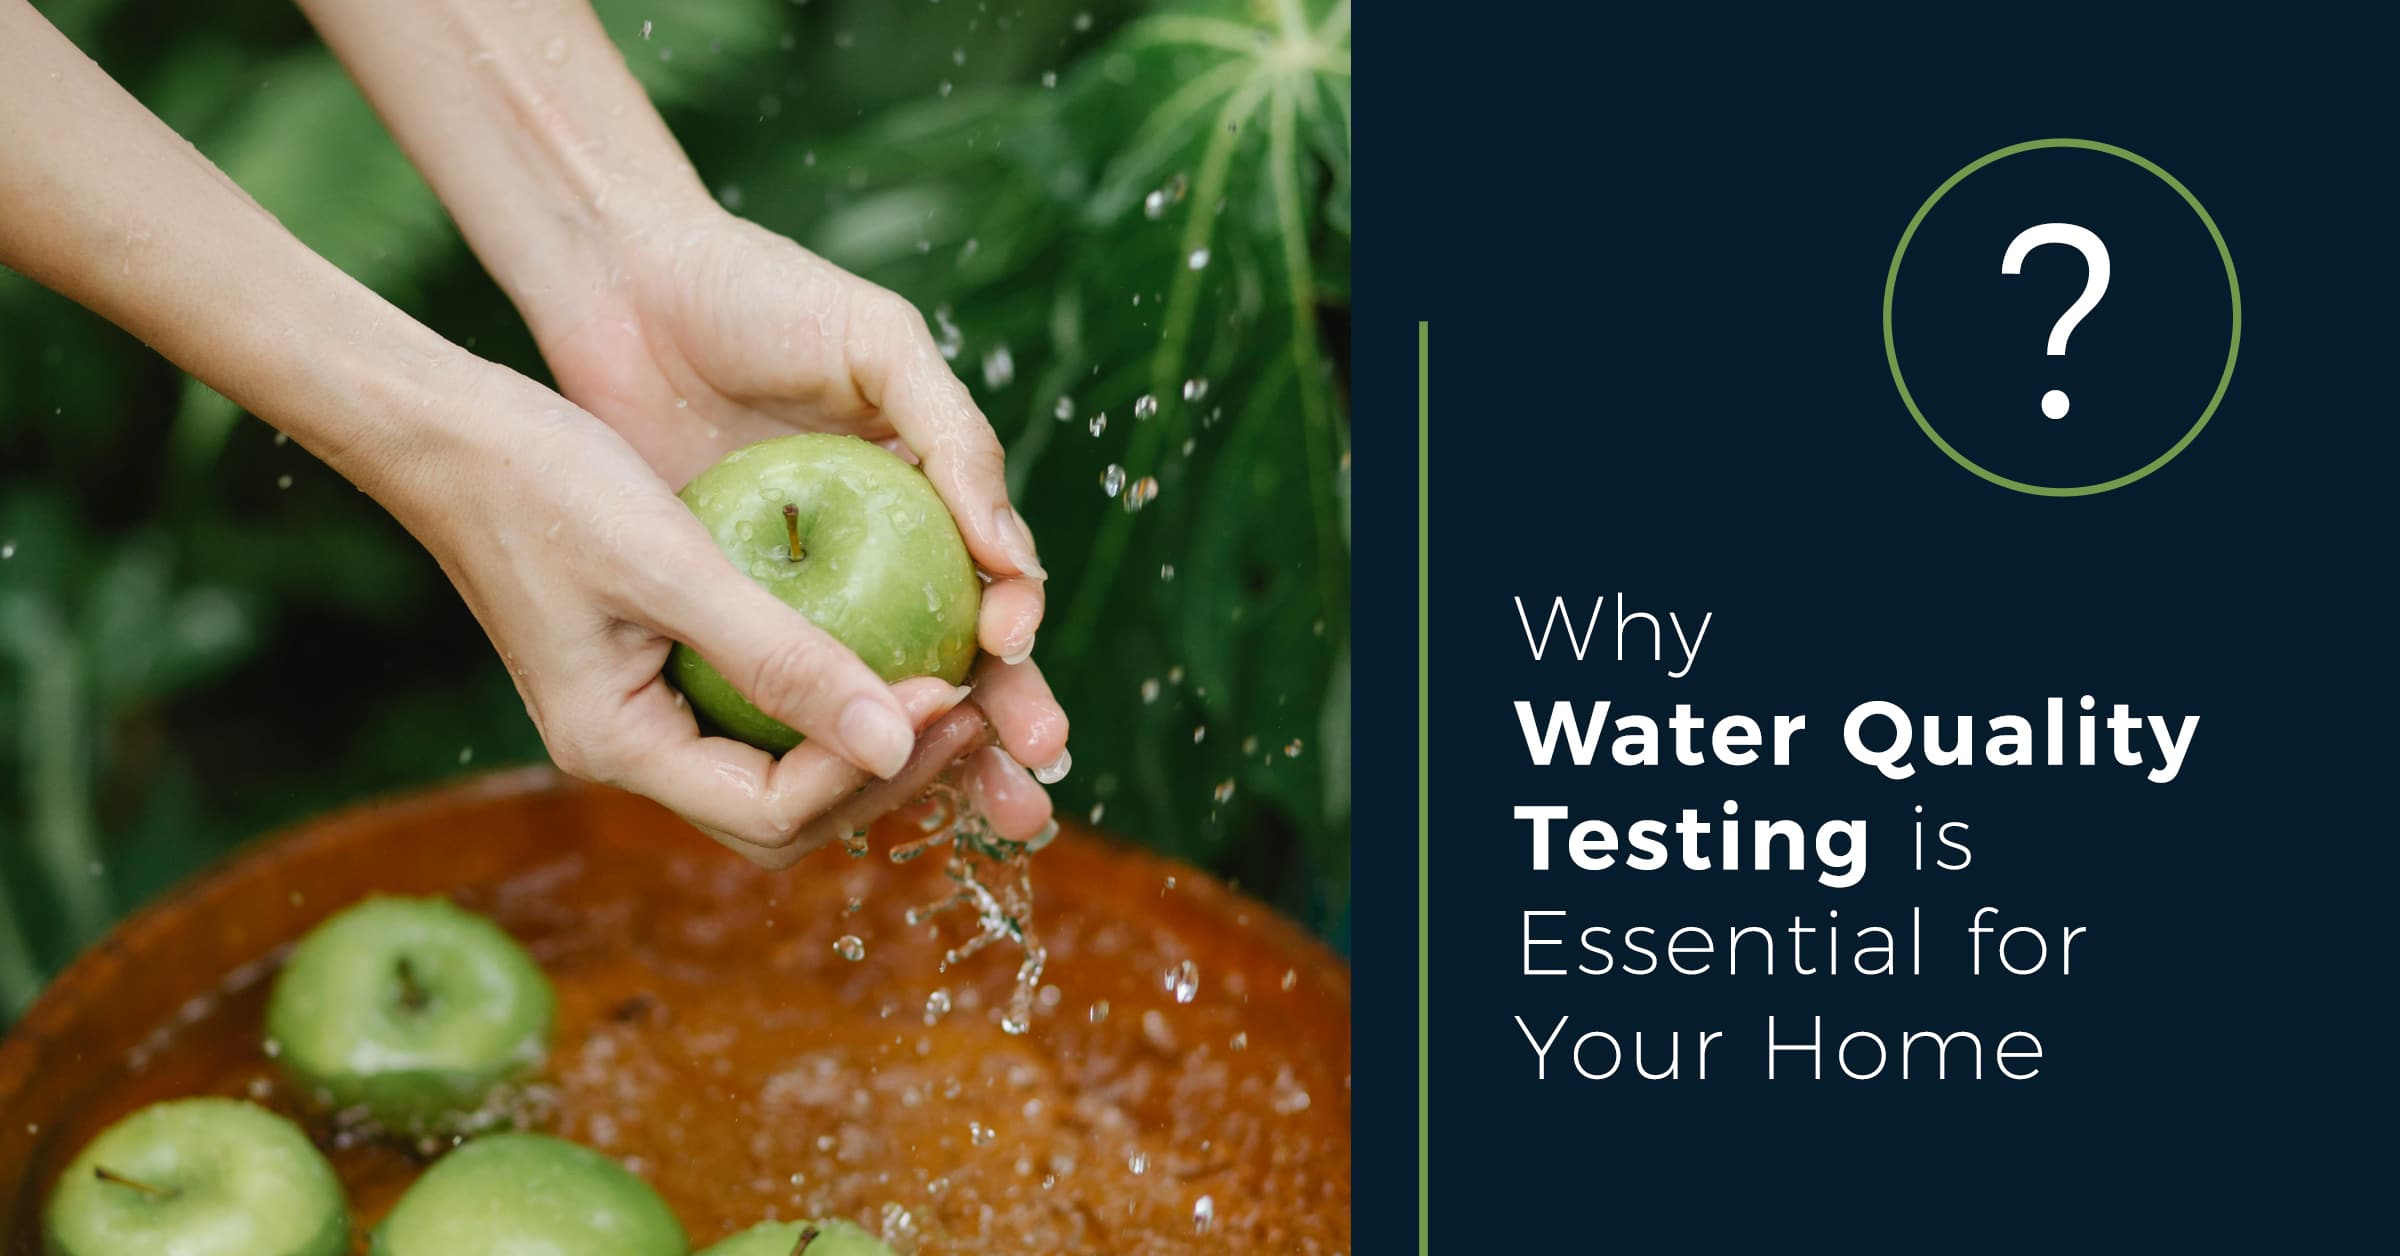 Hands washing an apple. "Why Water Quality Testing is important for Your Home.